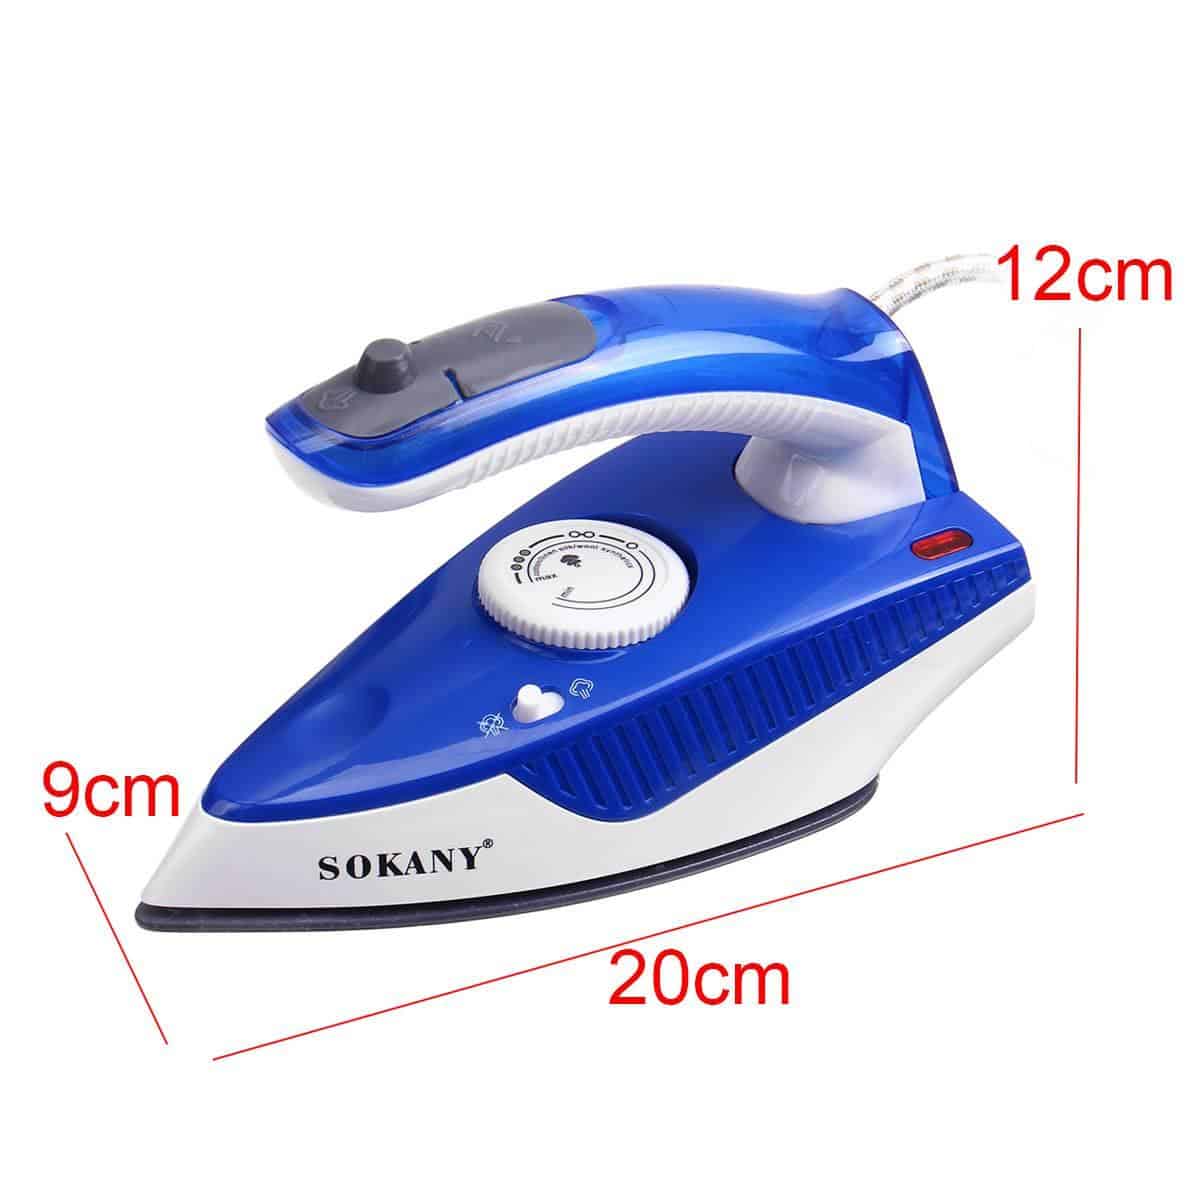 Spray Steam Iron 1000W Clothes Ironing Steamer Folding Handle Electric Irons Ceramic Soleplate for Garment Steam Generator